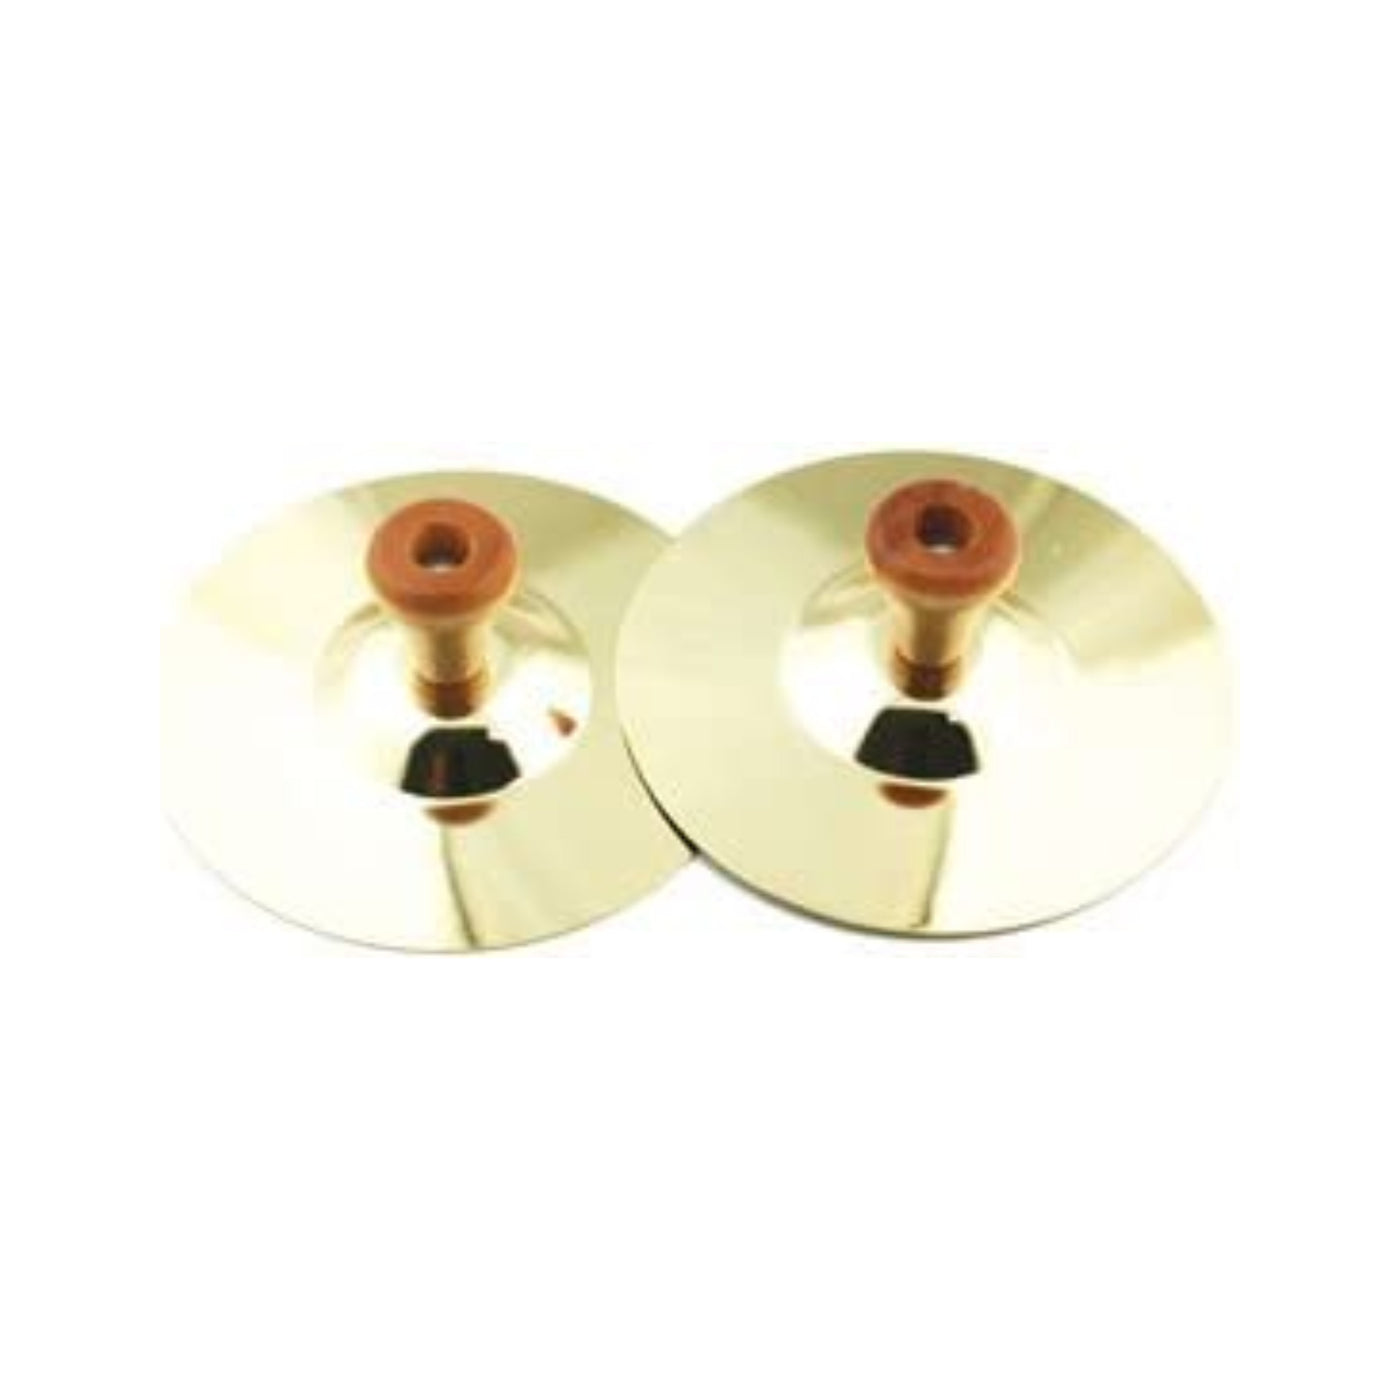 Grover/Trophy Handheld Cymbal Accessory (3701)